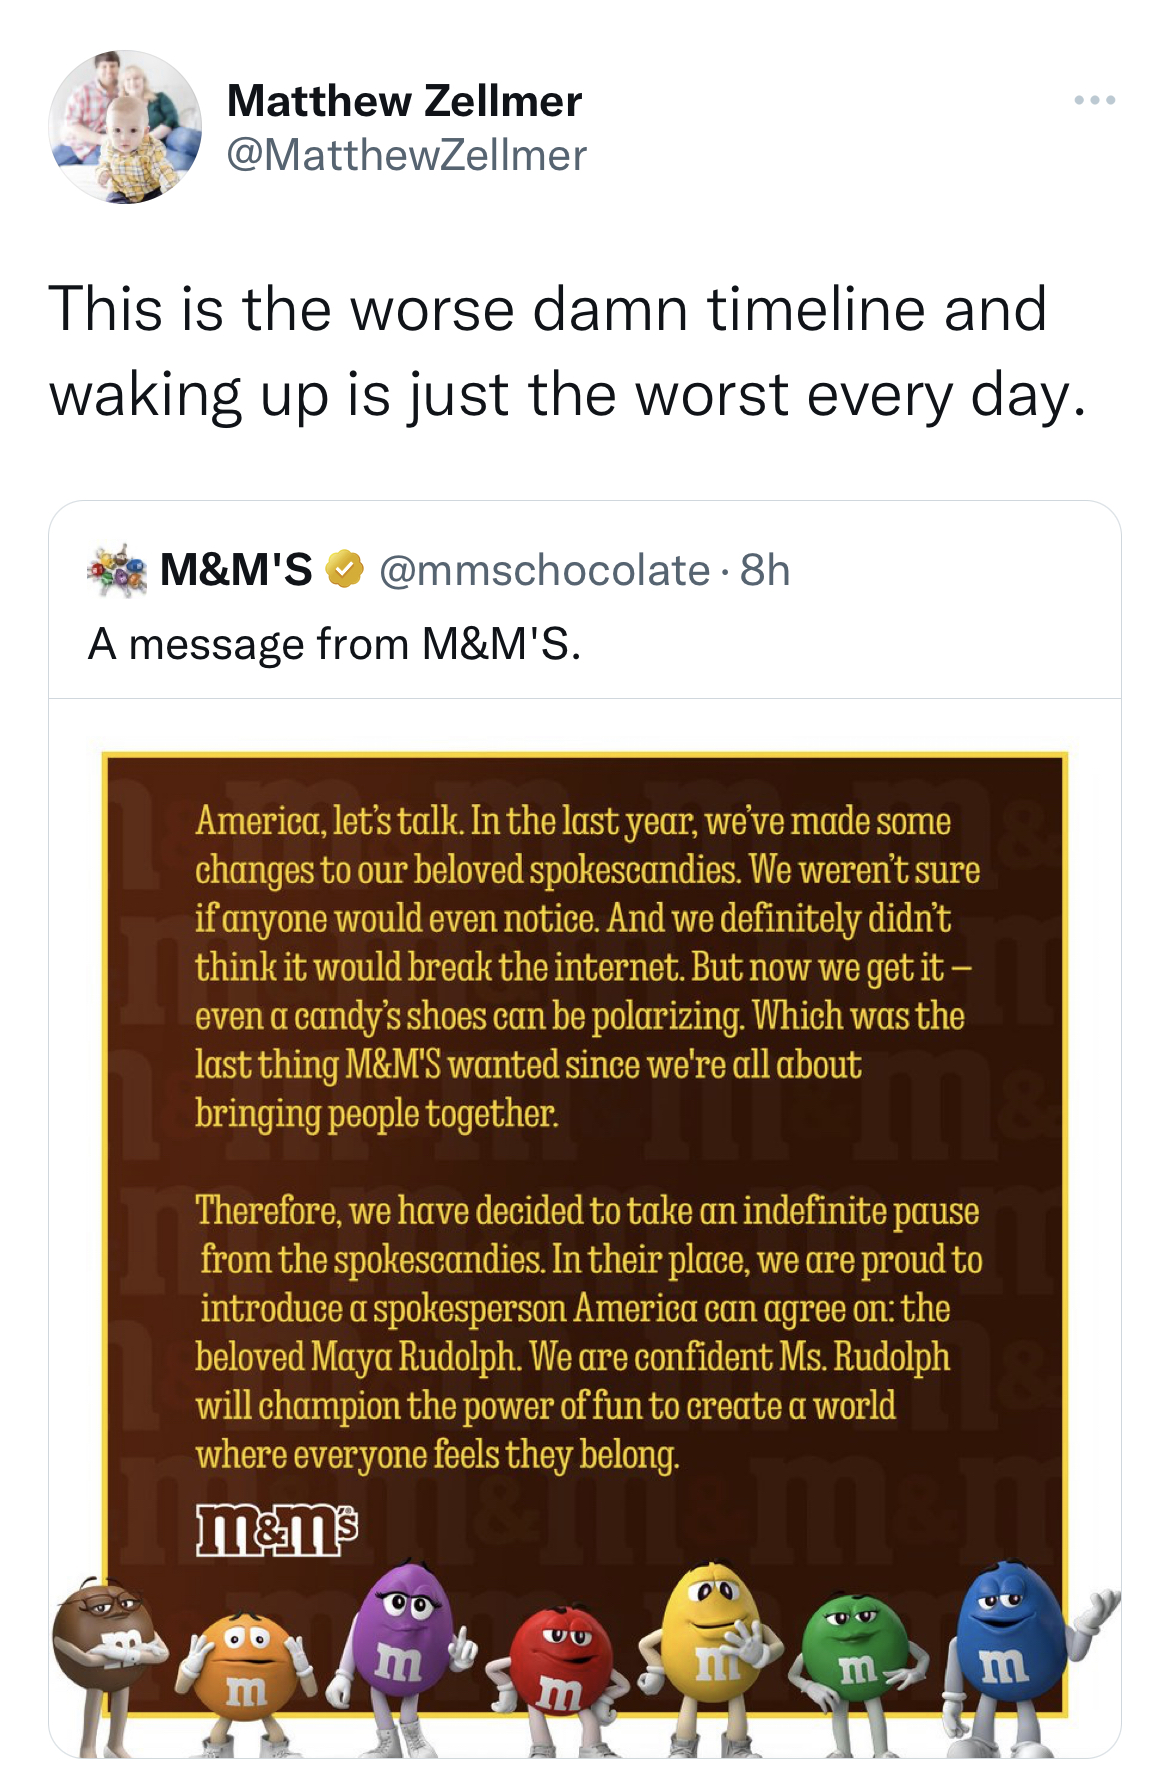 tweets dunking on celebs - Matthew Zellmer This is the worse damn timeline and waking up is just the worst every day. M&M'S A message from M&M'S. 8h America, let's talk In the last year, we've made some changes to our beloved spokescandies. We weren't sur